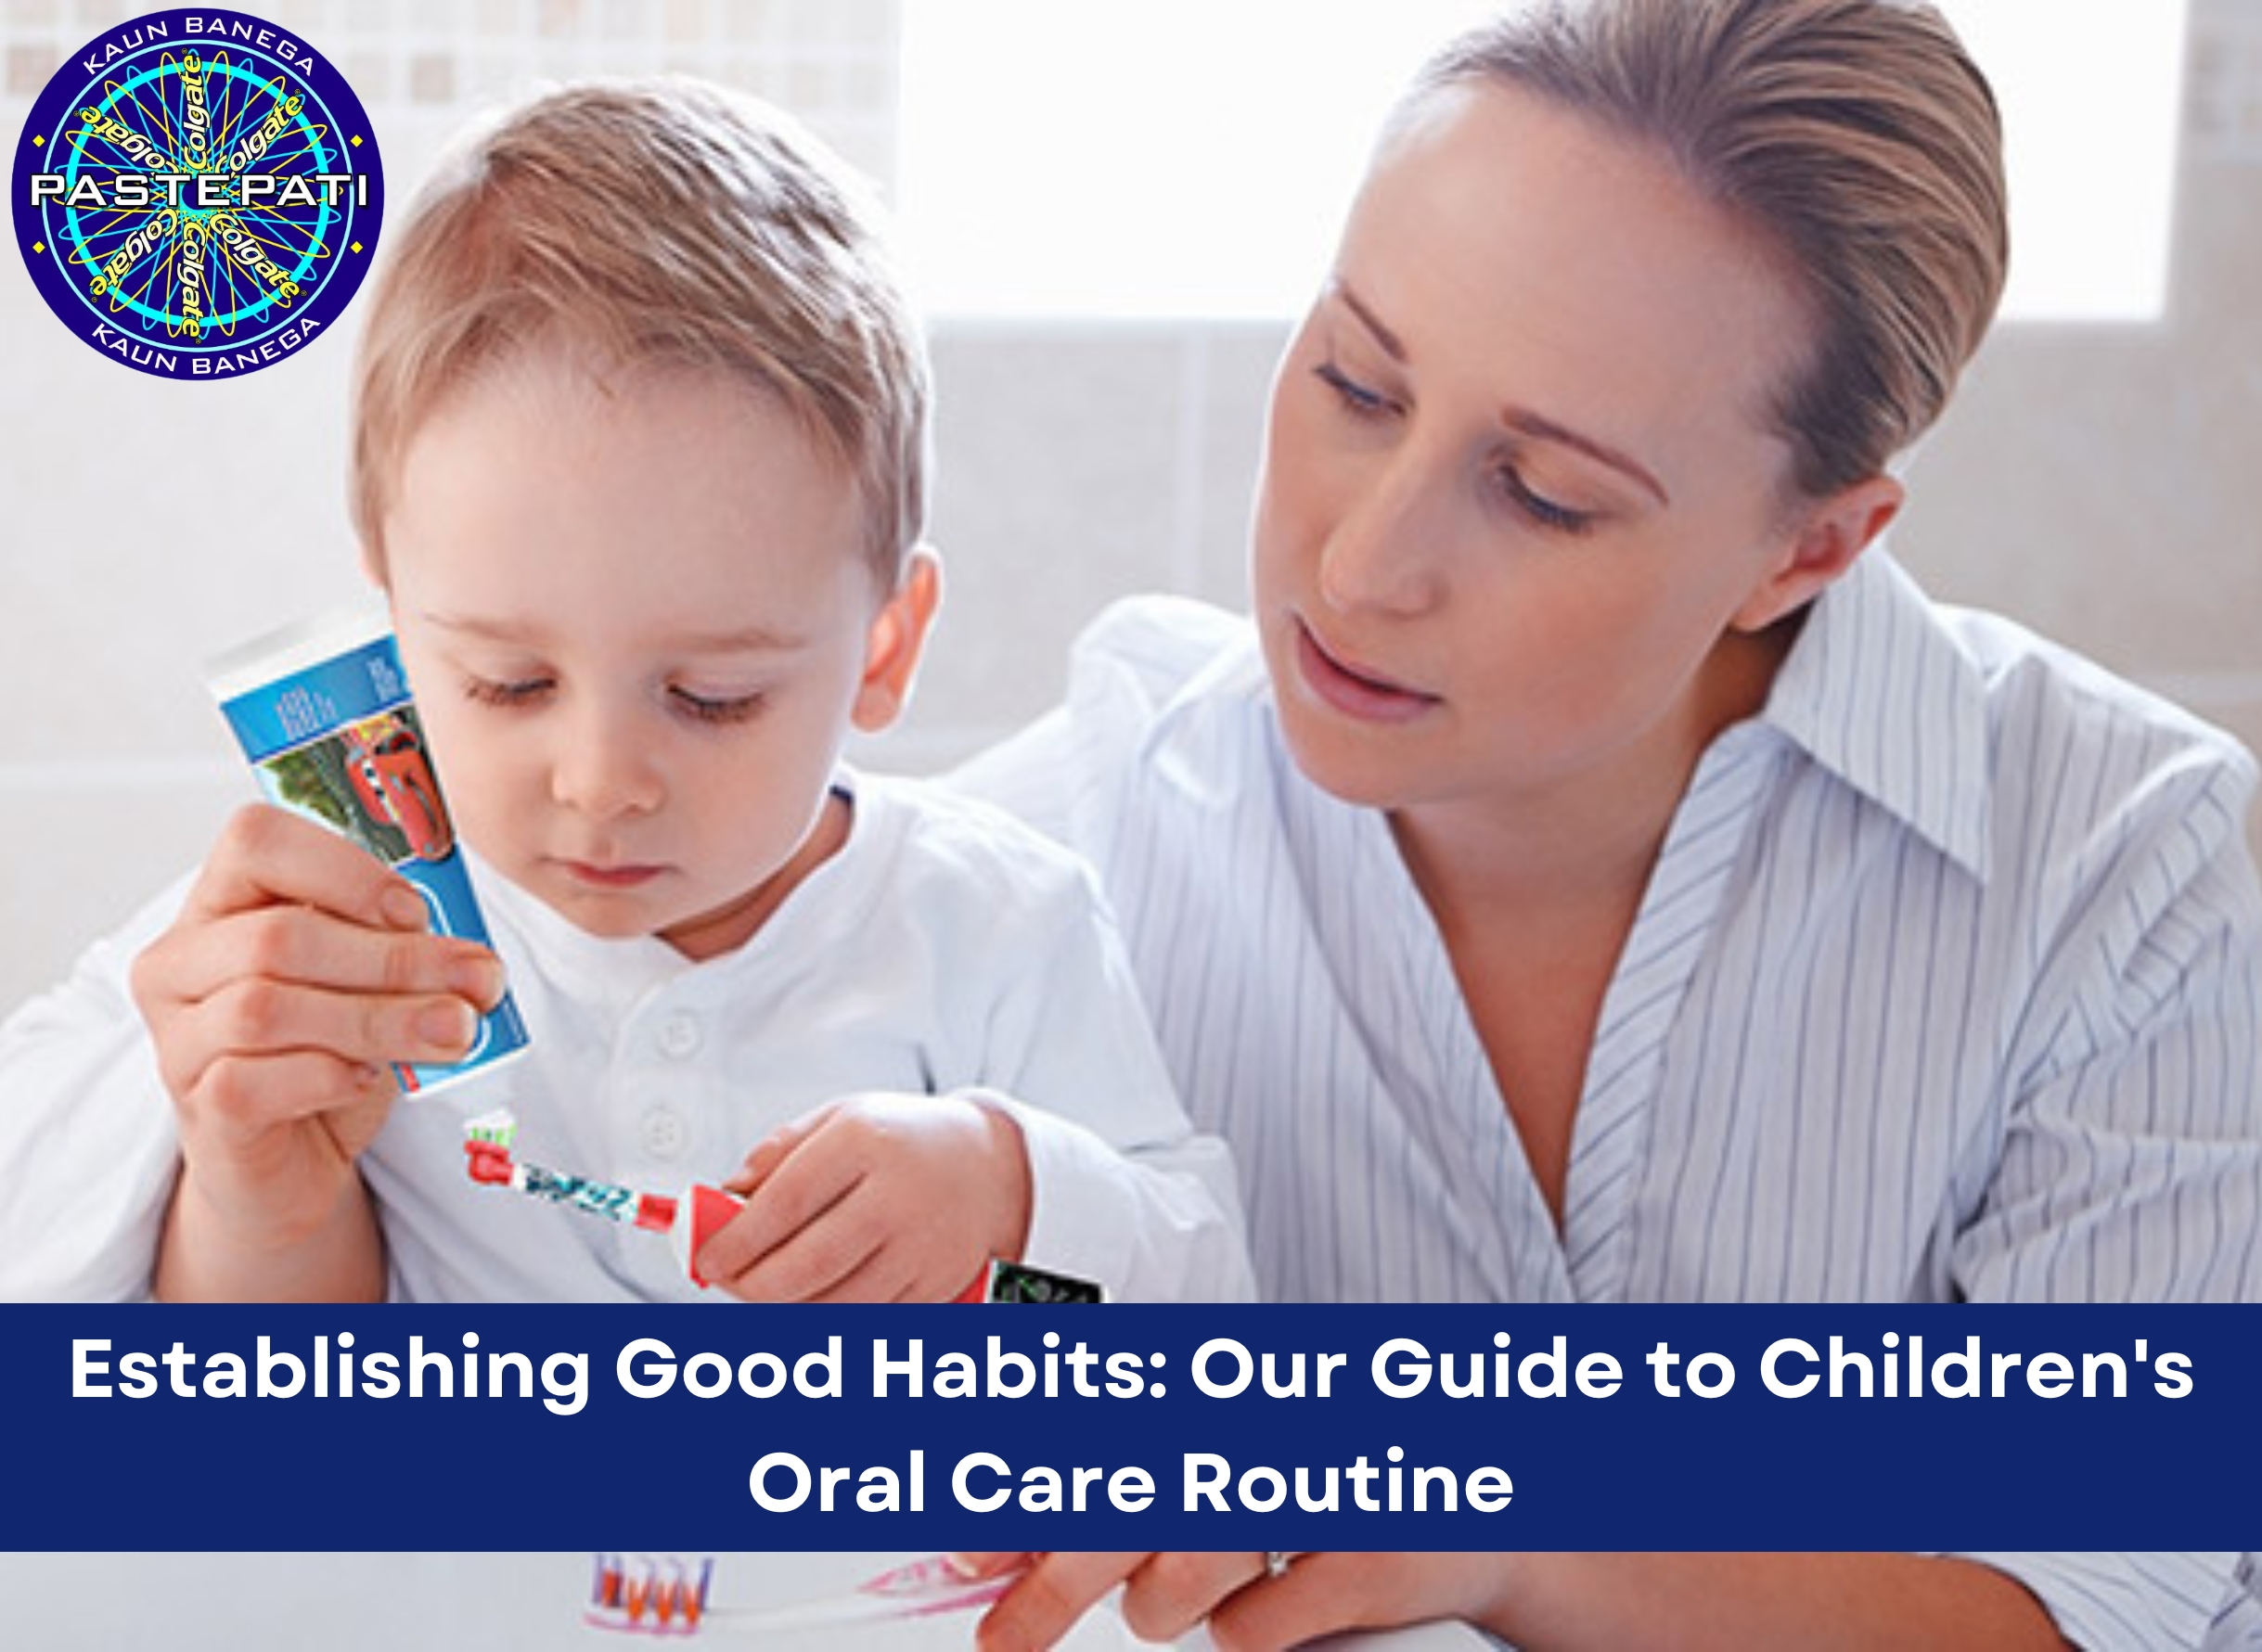 Establishing Good Habits: Our Guide to Children’s Oral Care Routine